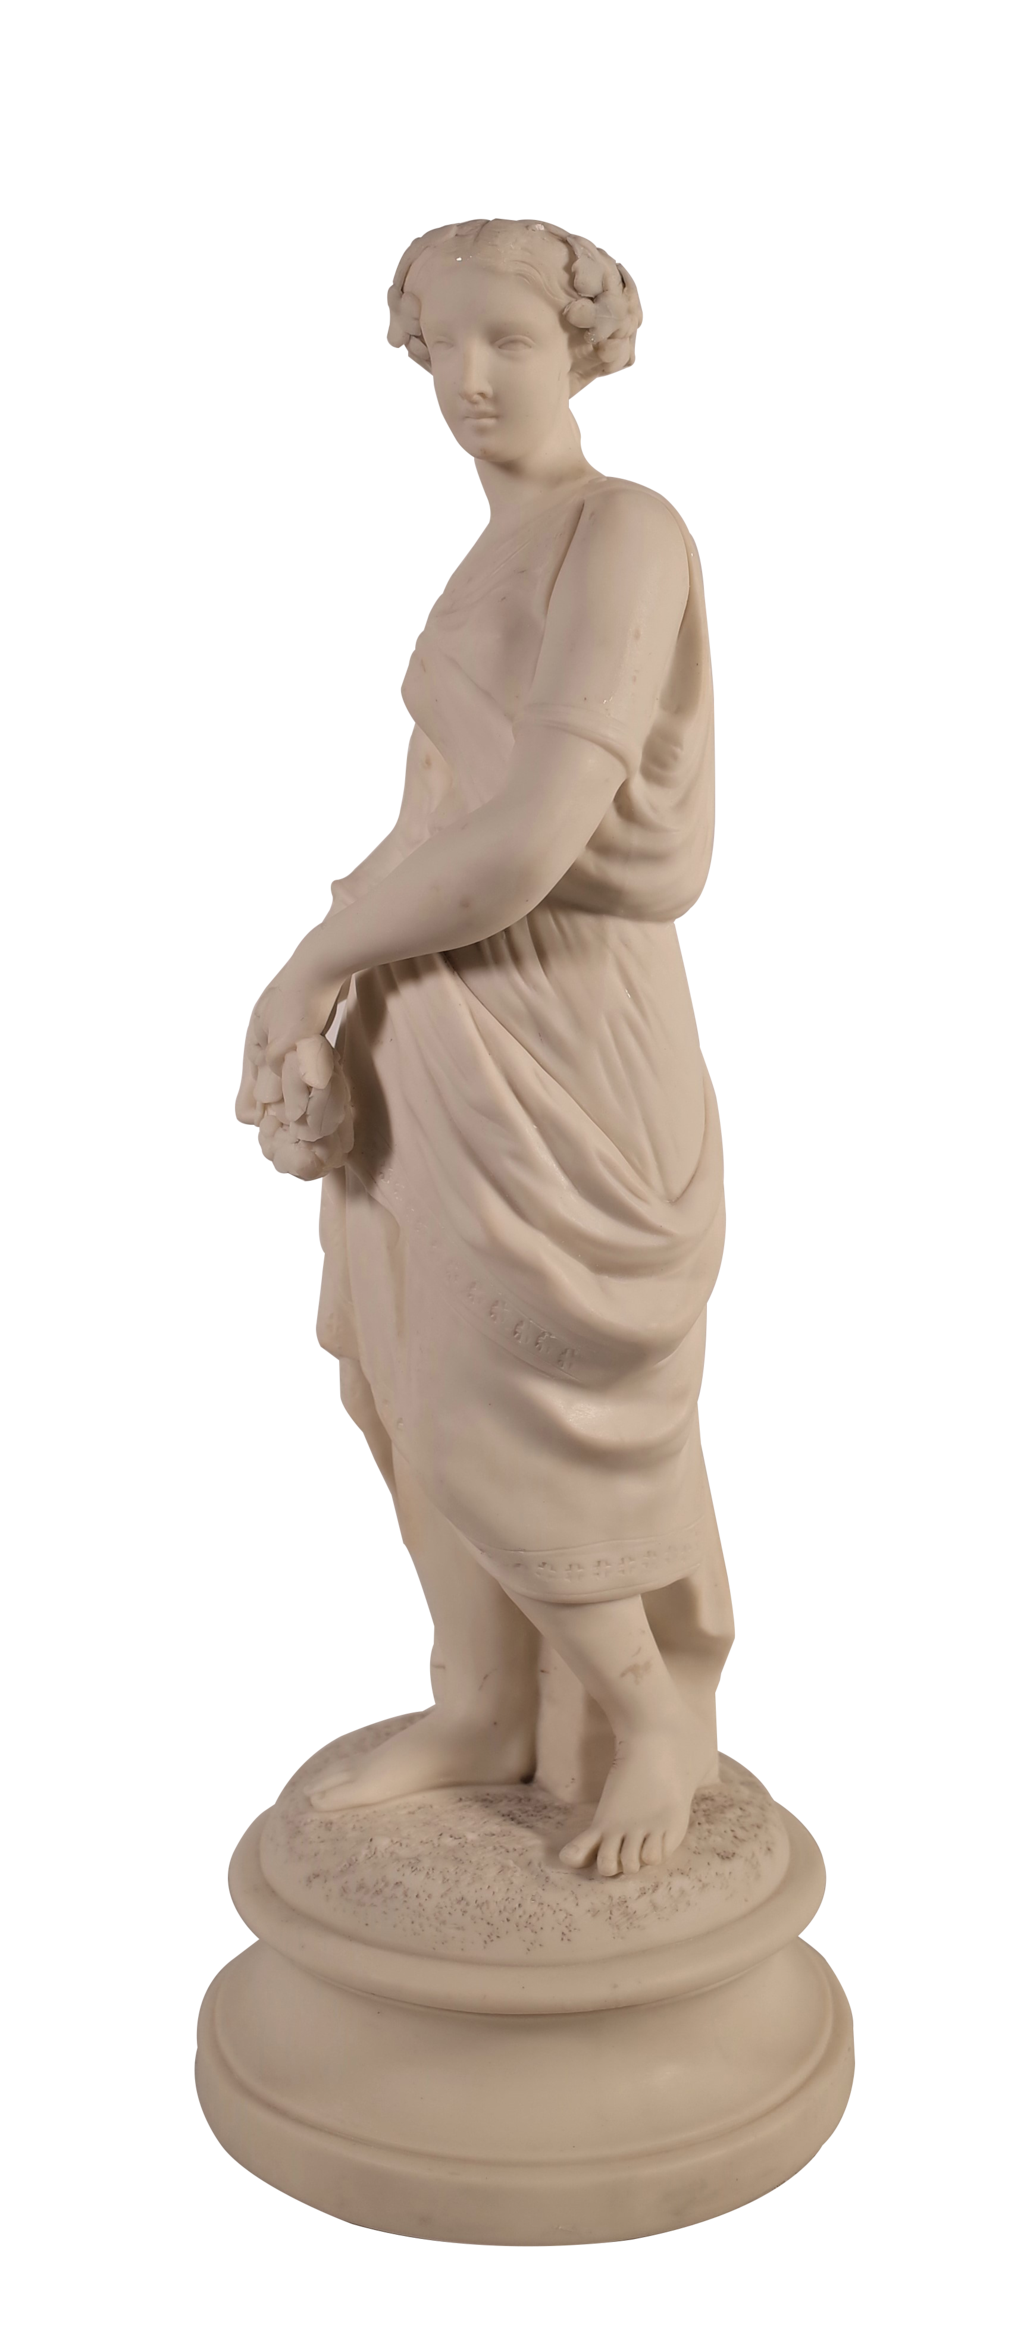 Parian Ware Figure of a Woman in Classical Robes Standing on Round Plinth and Holding a Wreath